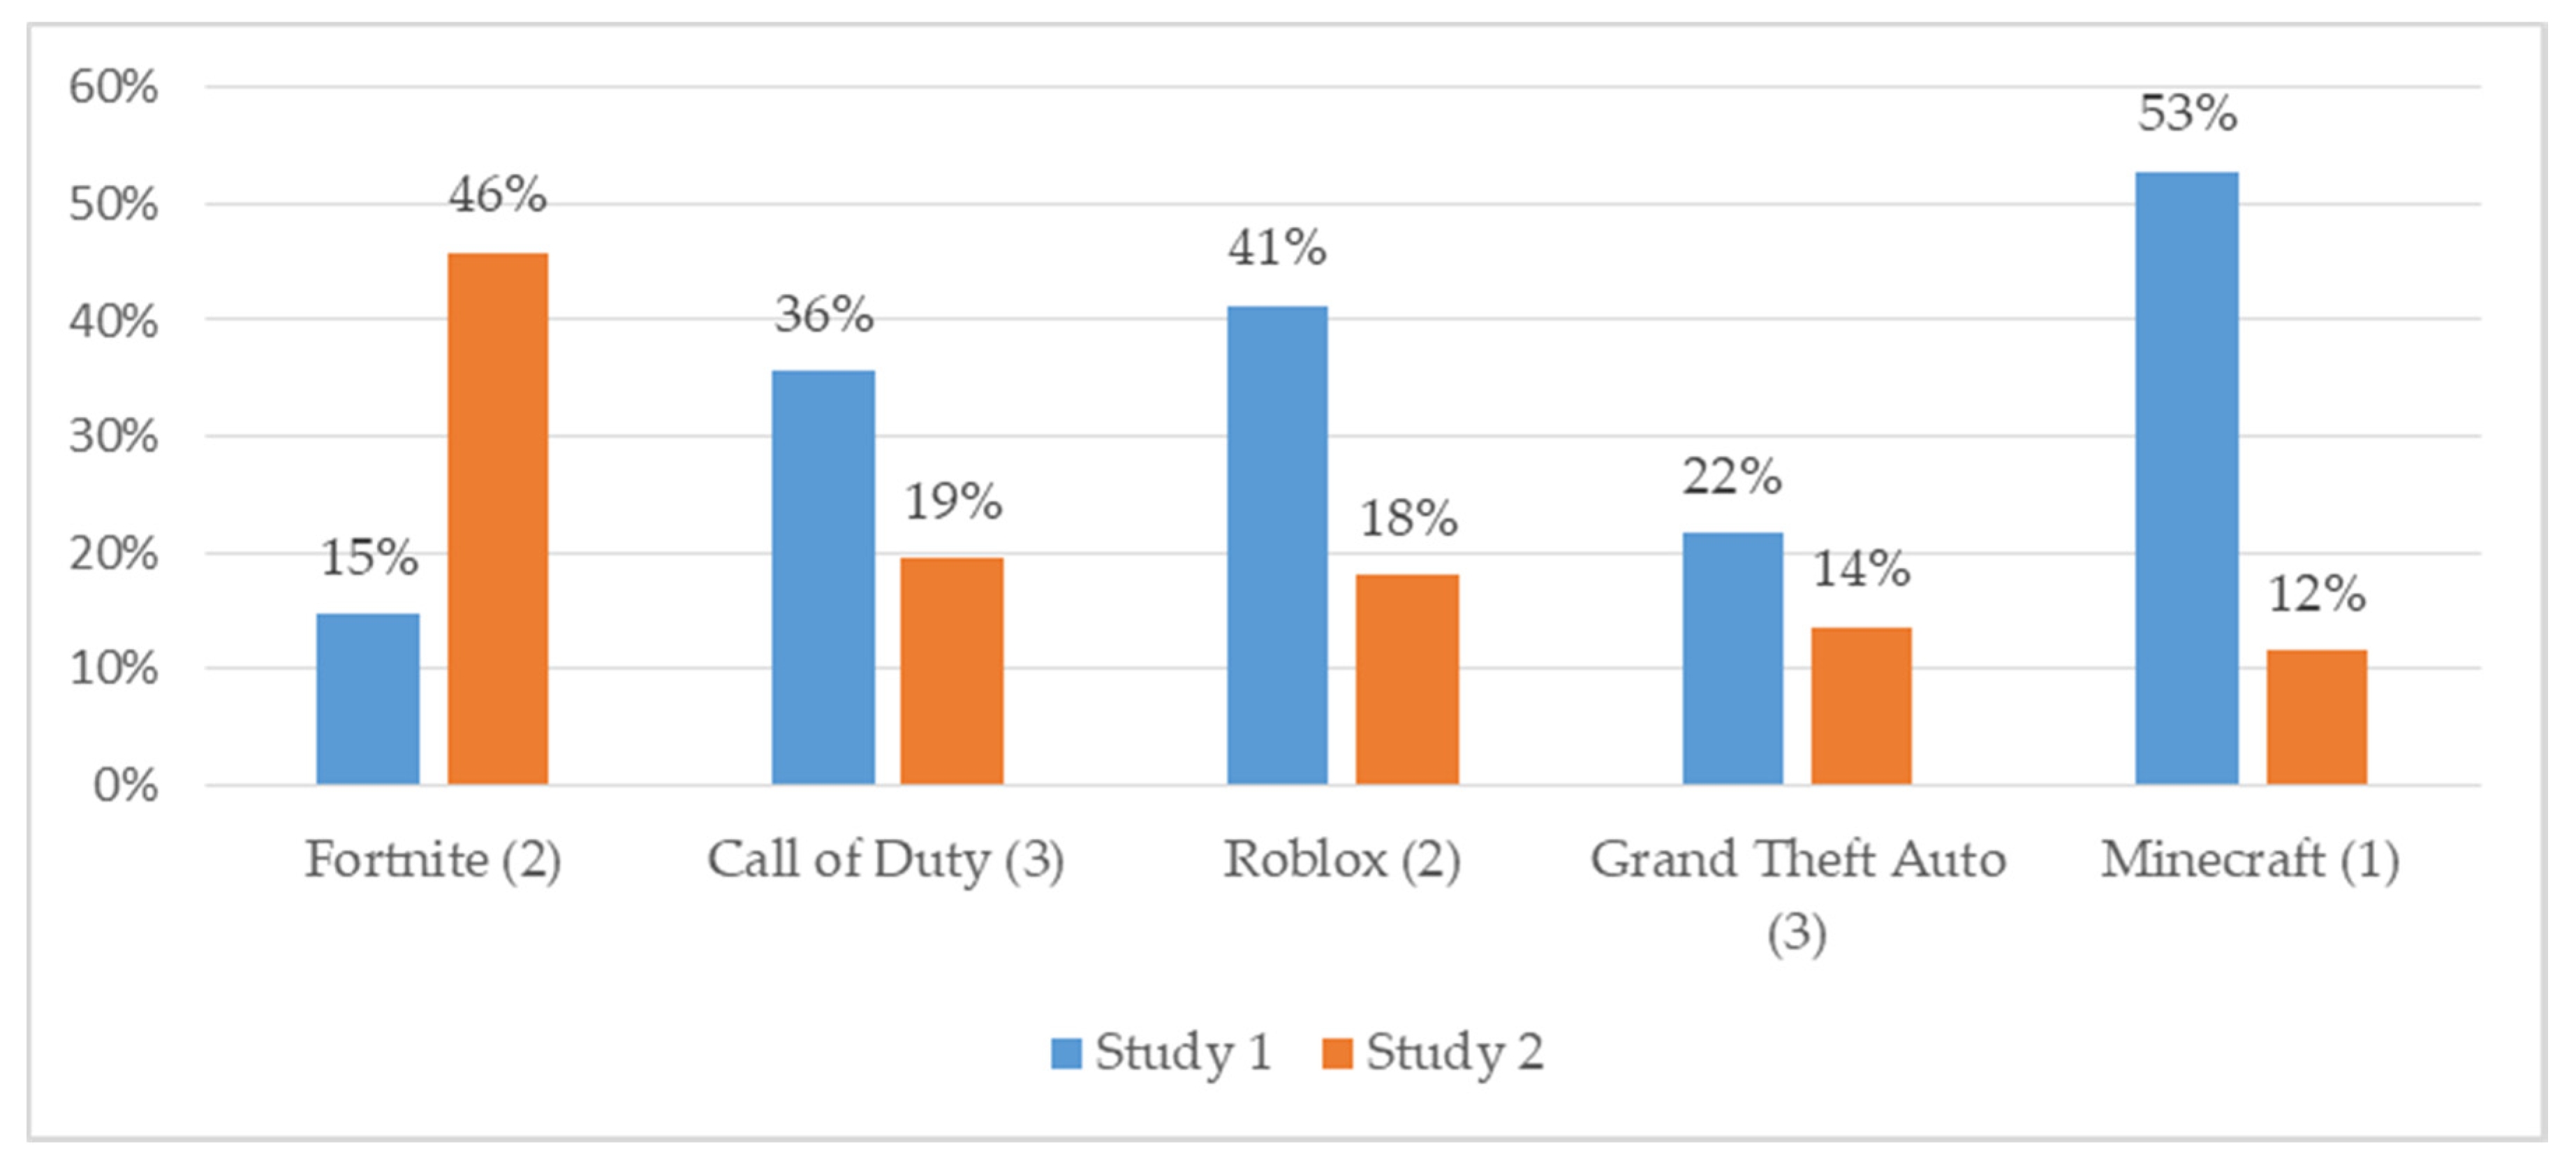 Ijerph Free Full Text Social And Behavioral Health Factors Associated With Violent And Mature Gaming In Early Adolescence Html - testing bugs short roblox world of arthropods youtube